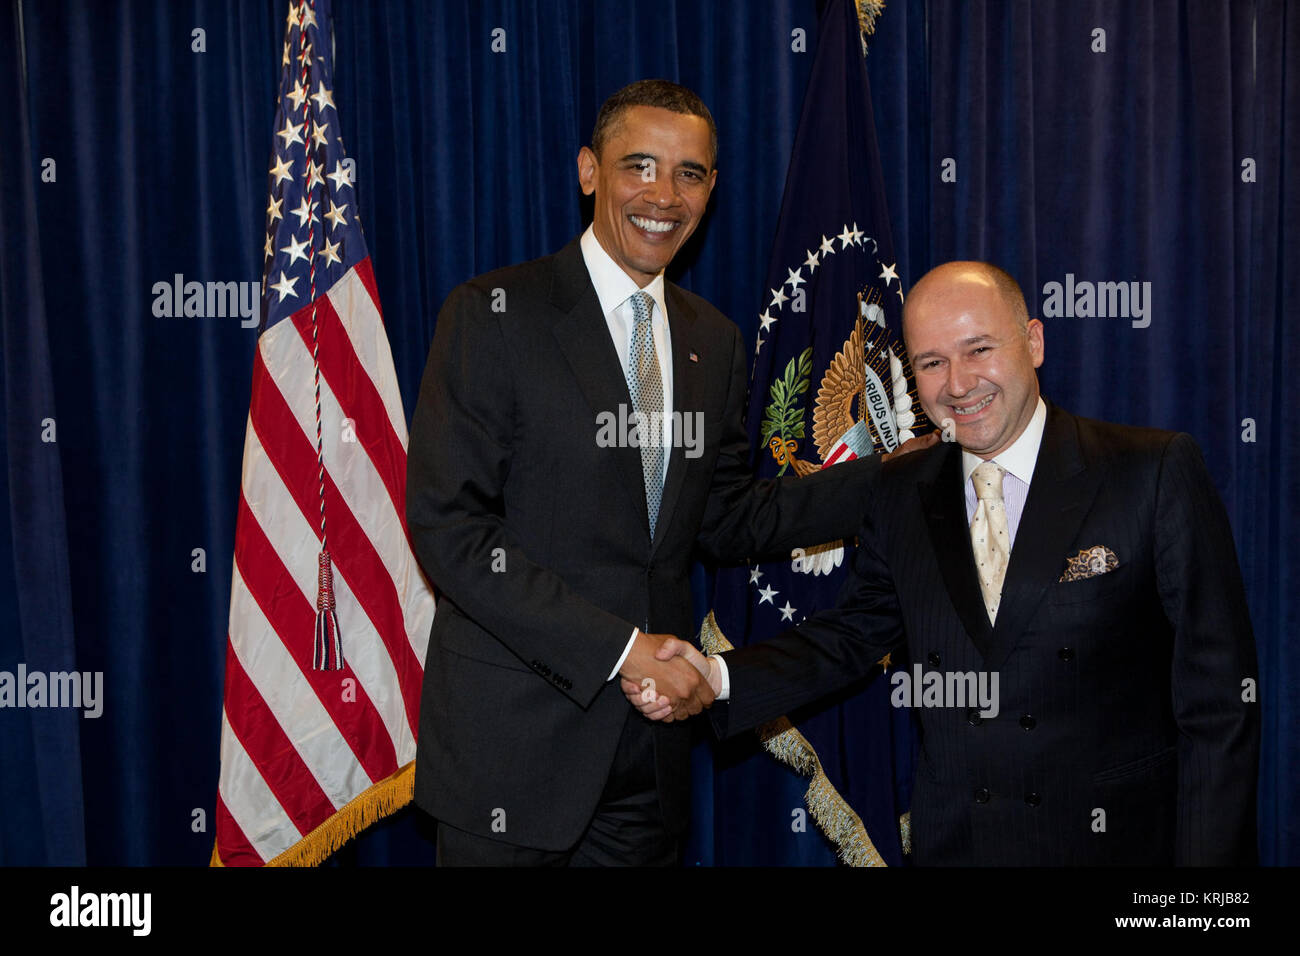 President Obama greets Baybar Altuntas of Turkey at the Presidential Summit on Entrepreneurship.  President Obama announced in his speech that Prime Minister Erdogan and Turkey will host the next Entrepreneurship Summit in 2011. (Official White House Photo by Pete Souza) With President Obama Stock Photo